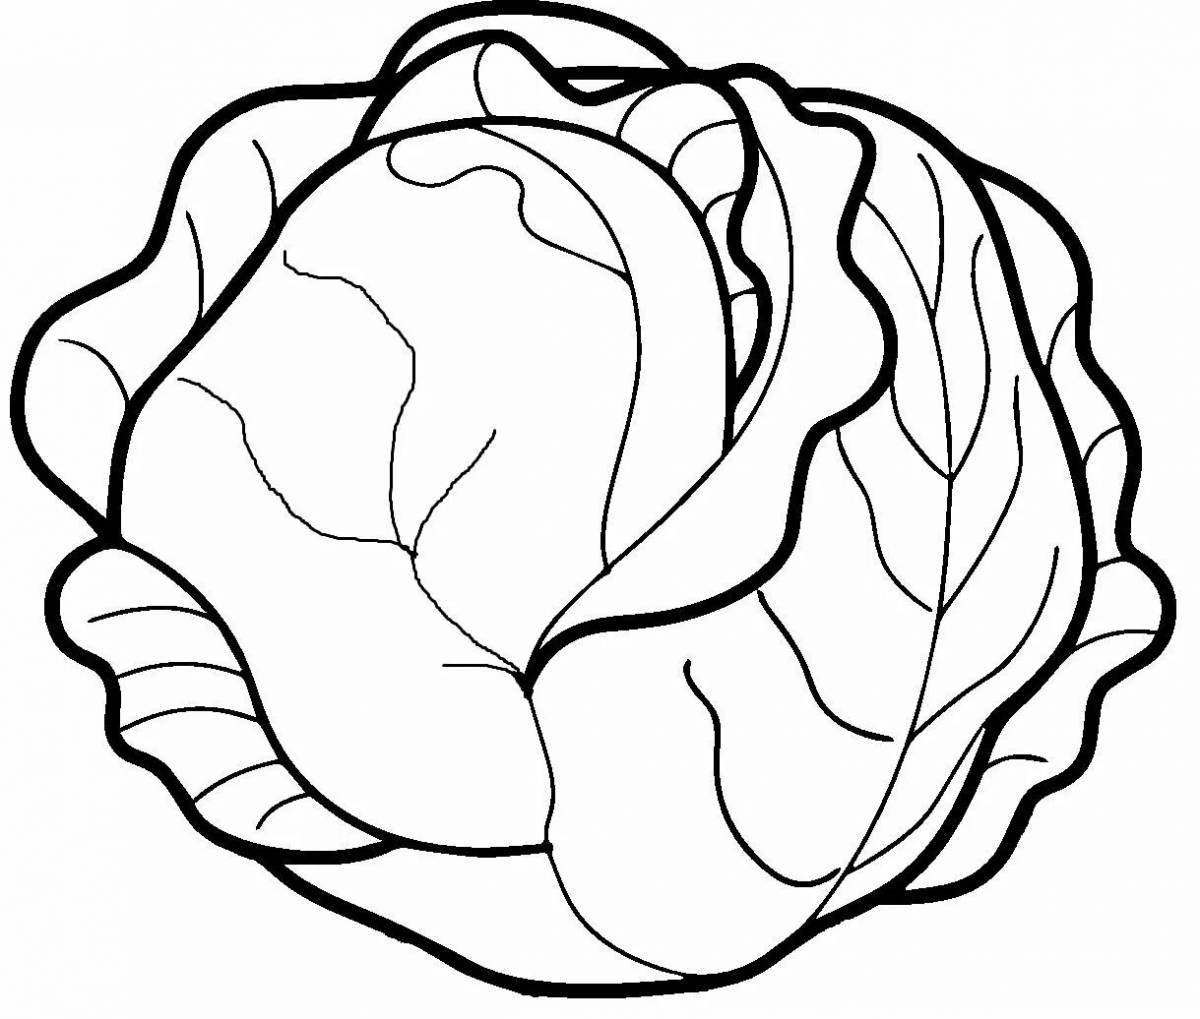 Cabbage coloring book for children 3-4 years old